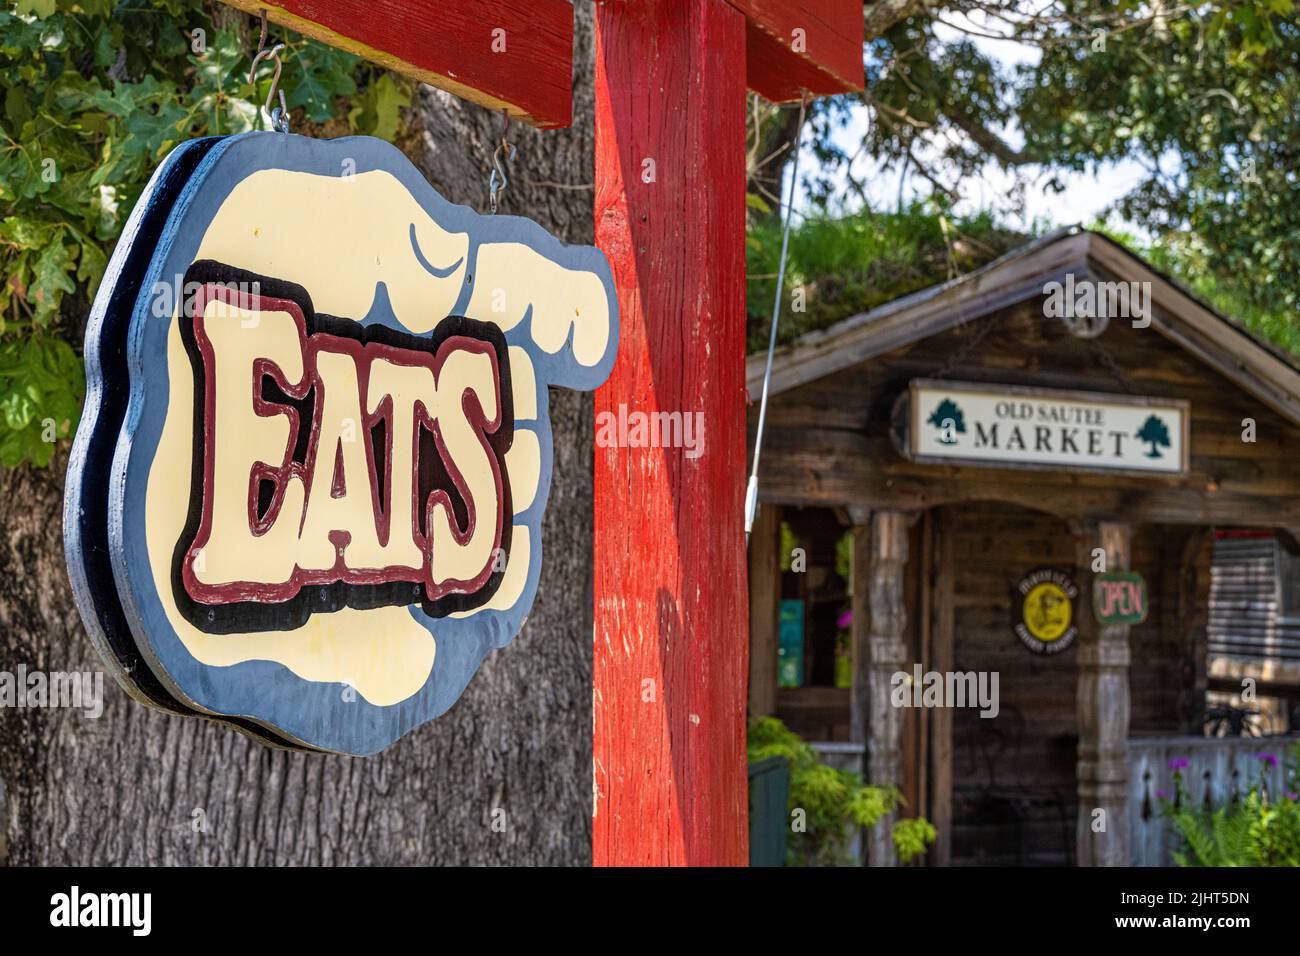 'Eats' sign pointing the way to Old Sautee Market offering fresh baked goods and hand crafted sandwiches for locals and visitors to Helen, Georgia. Stock Photo